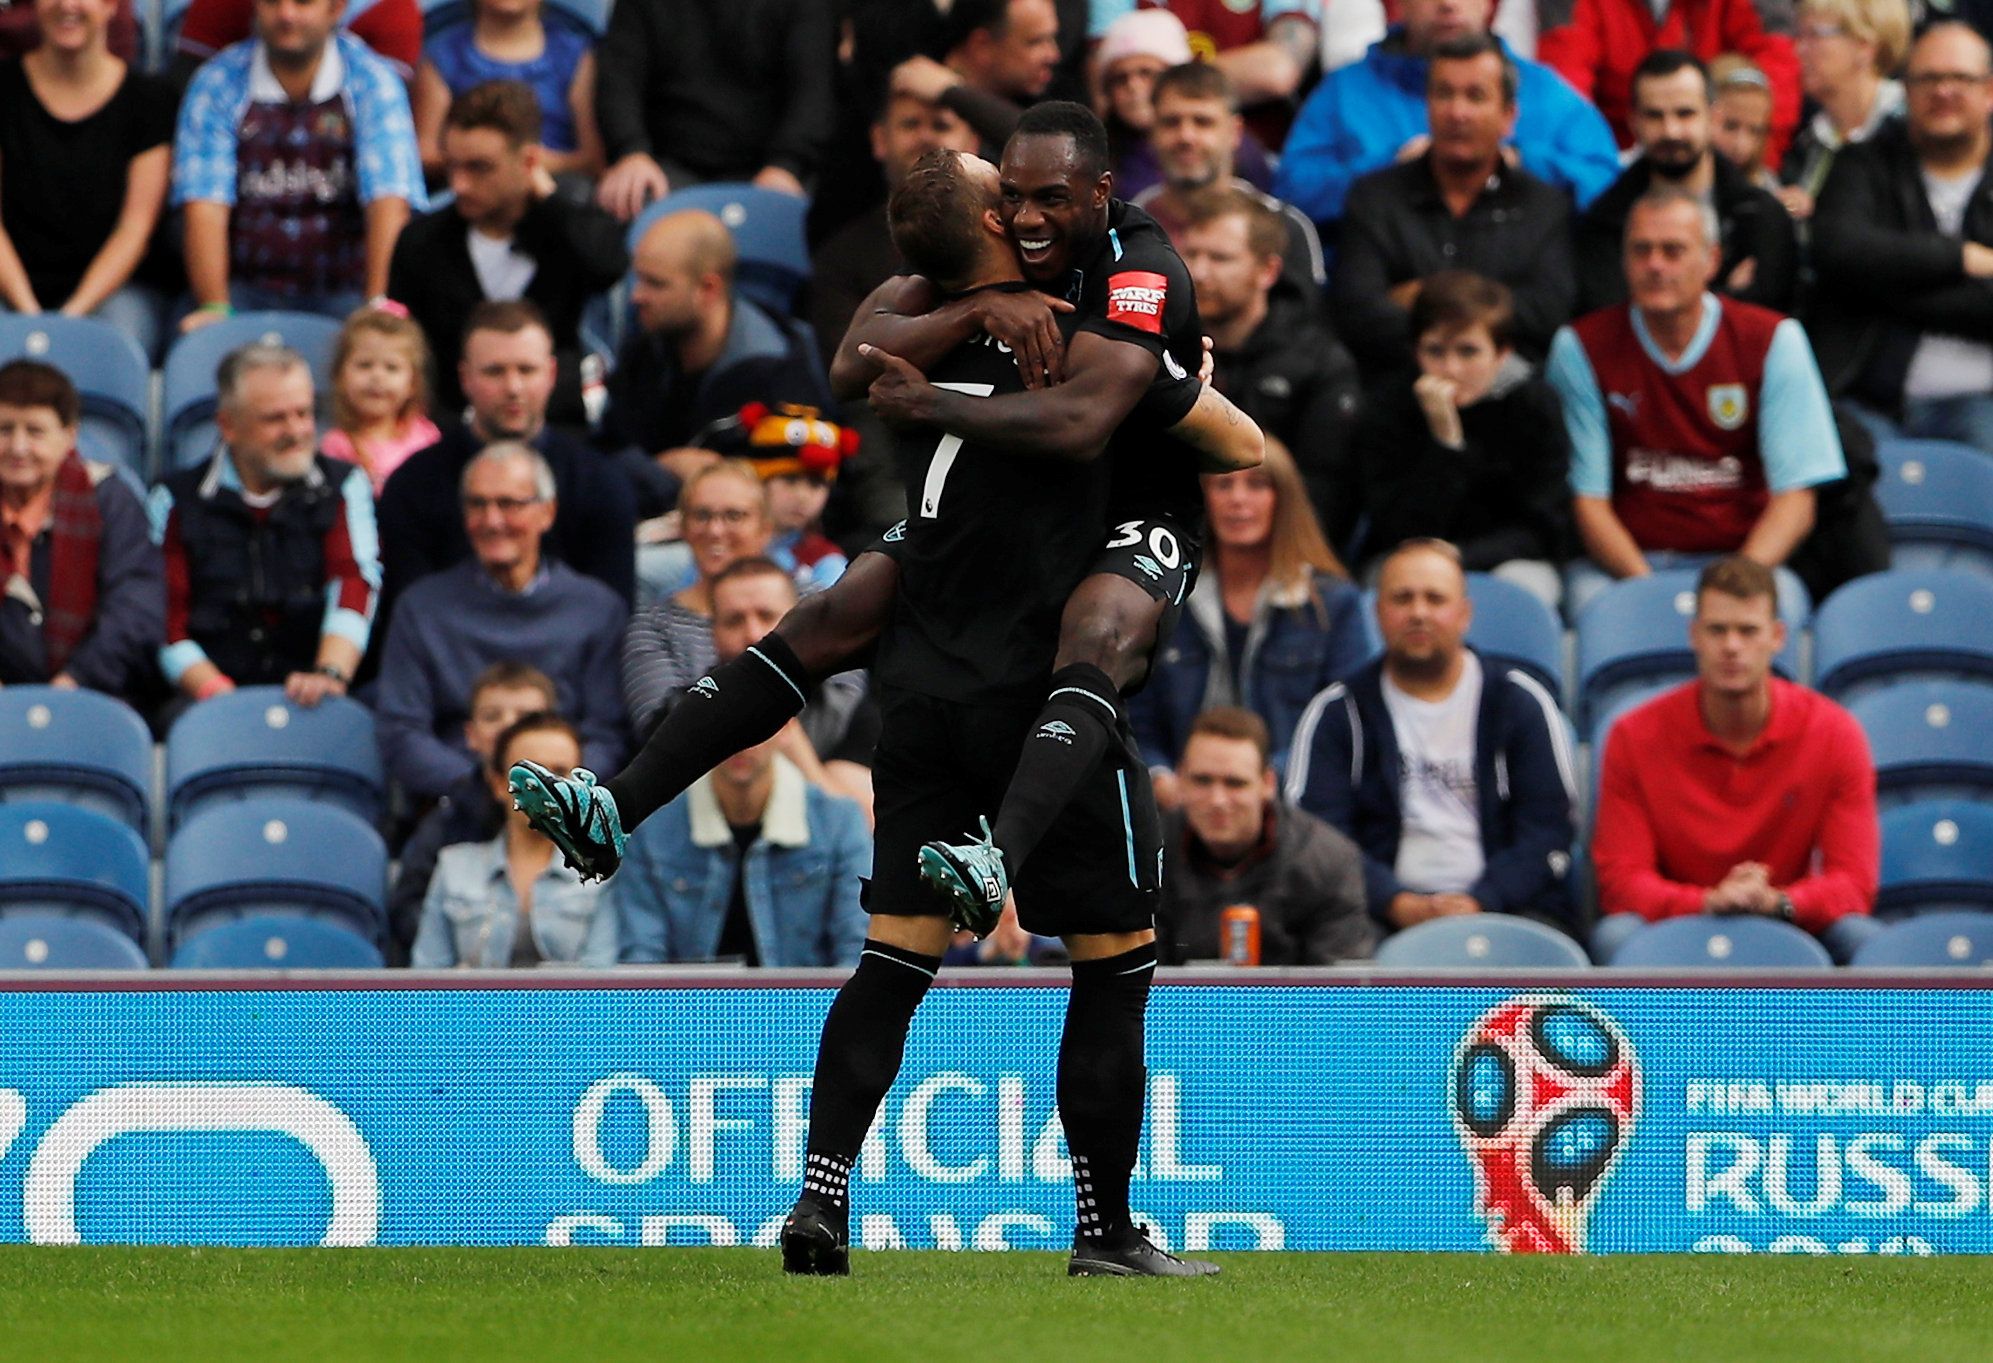 Soccer Football - Premier League - Burnley vs West Ham United - Turf Moor, Burnley, Britain - October 14, 2017   West Ham United's Michail Antonio celebrates scoring their first goal with Marko Arnautovic      Action Images via Reuters/Lee Smith    EDITORIAL USE ONLY. No use with unauthorized audio, video, data, fixture lists, club/league logos or "live" services. Online in-match use limited to 75 images, no video emulation. No use in betting, games or single club/league/player publications. Ple